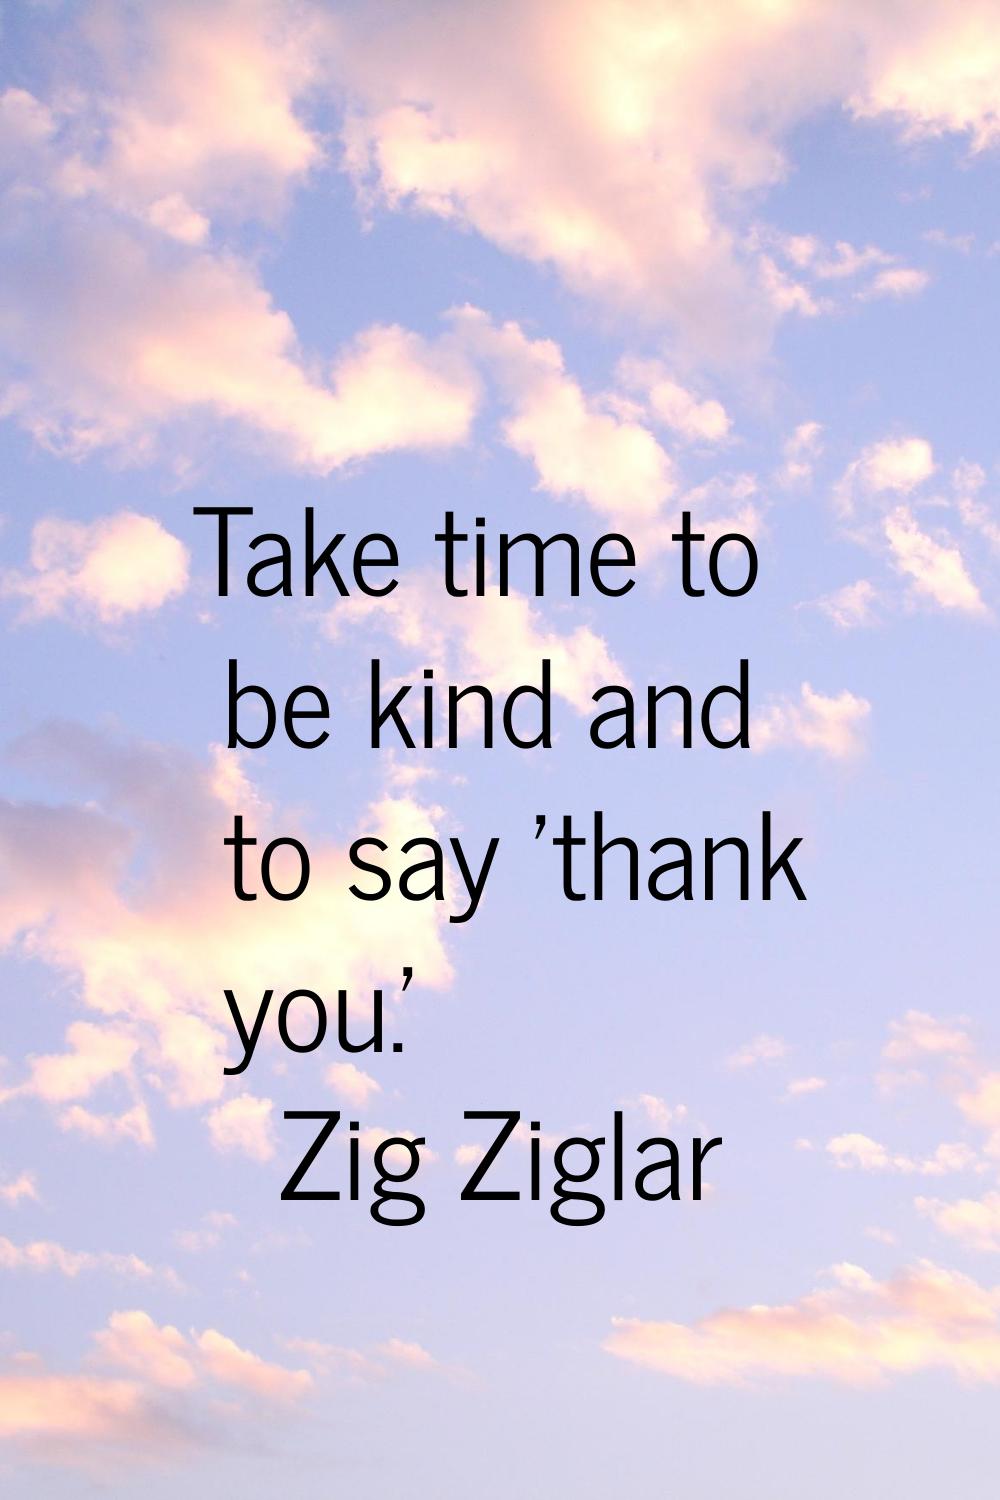 Take time to be kind and to say 'thank you.'